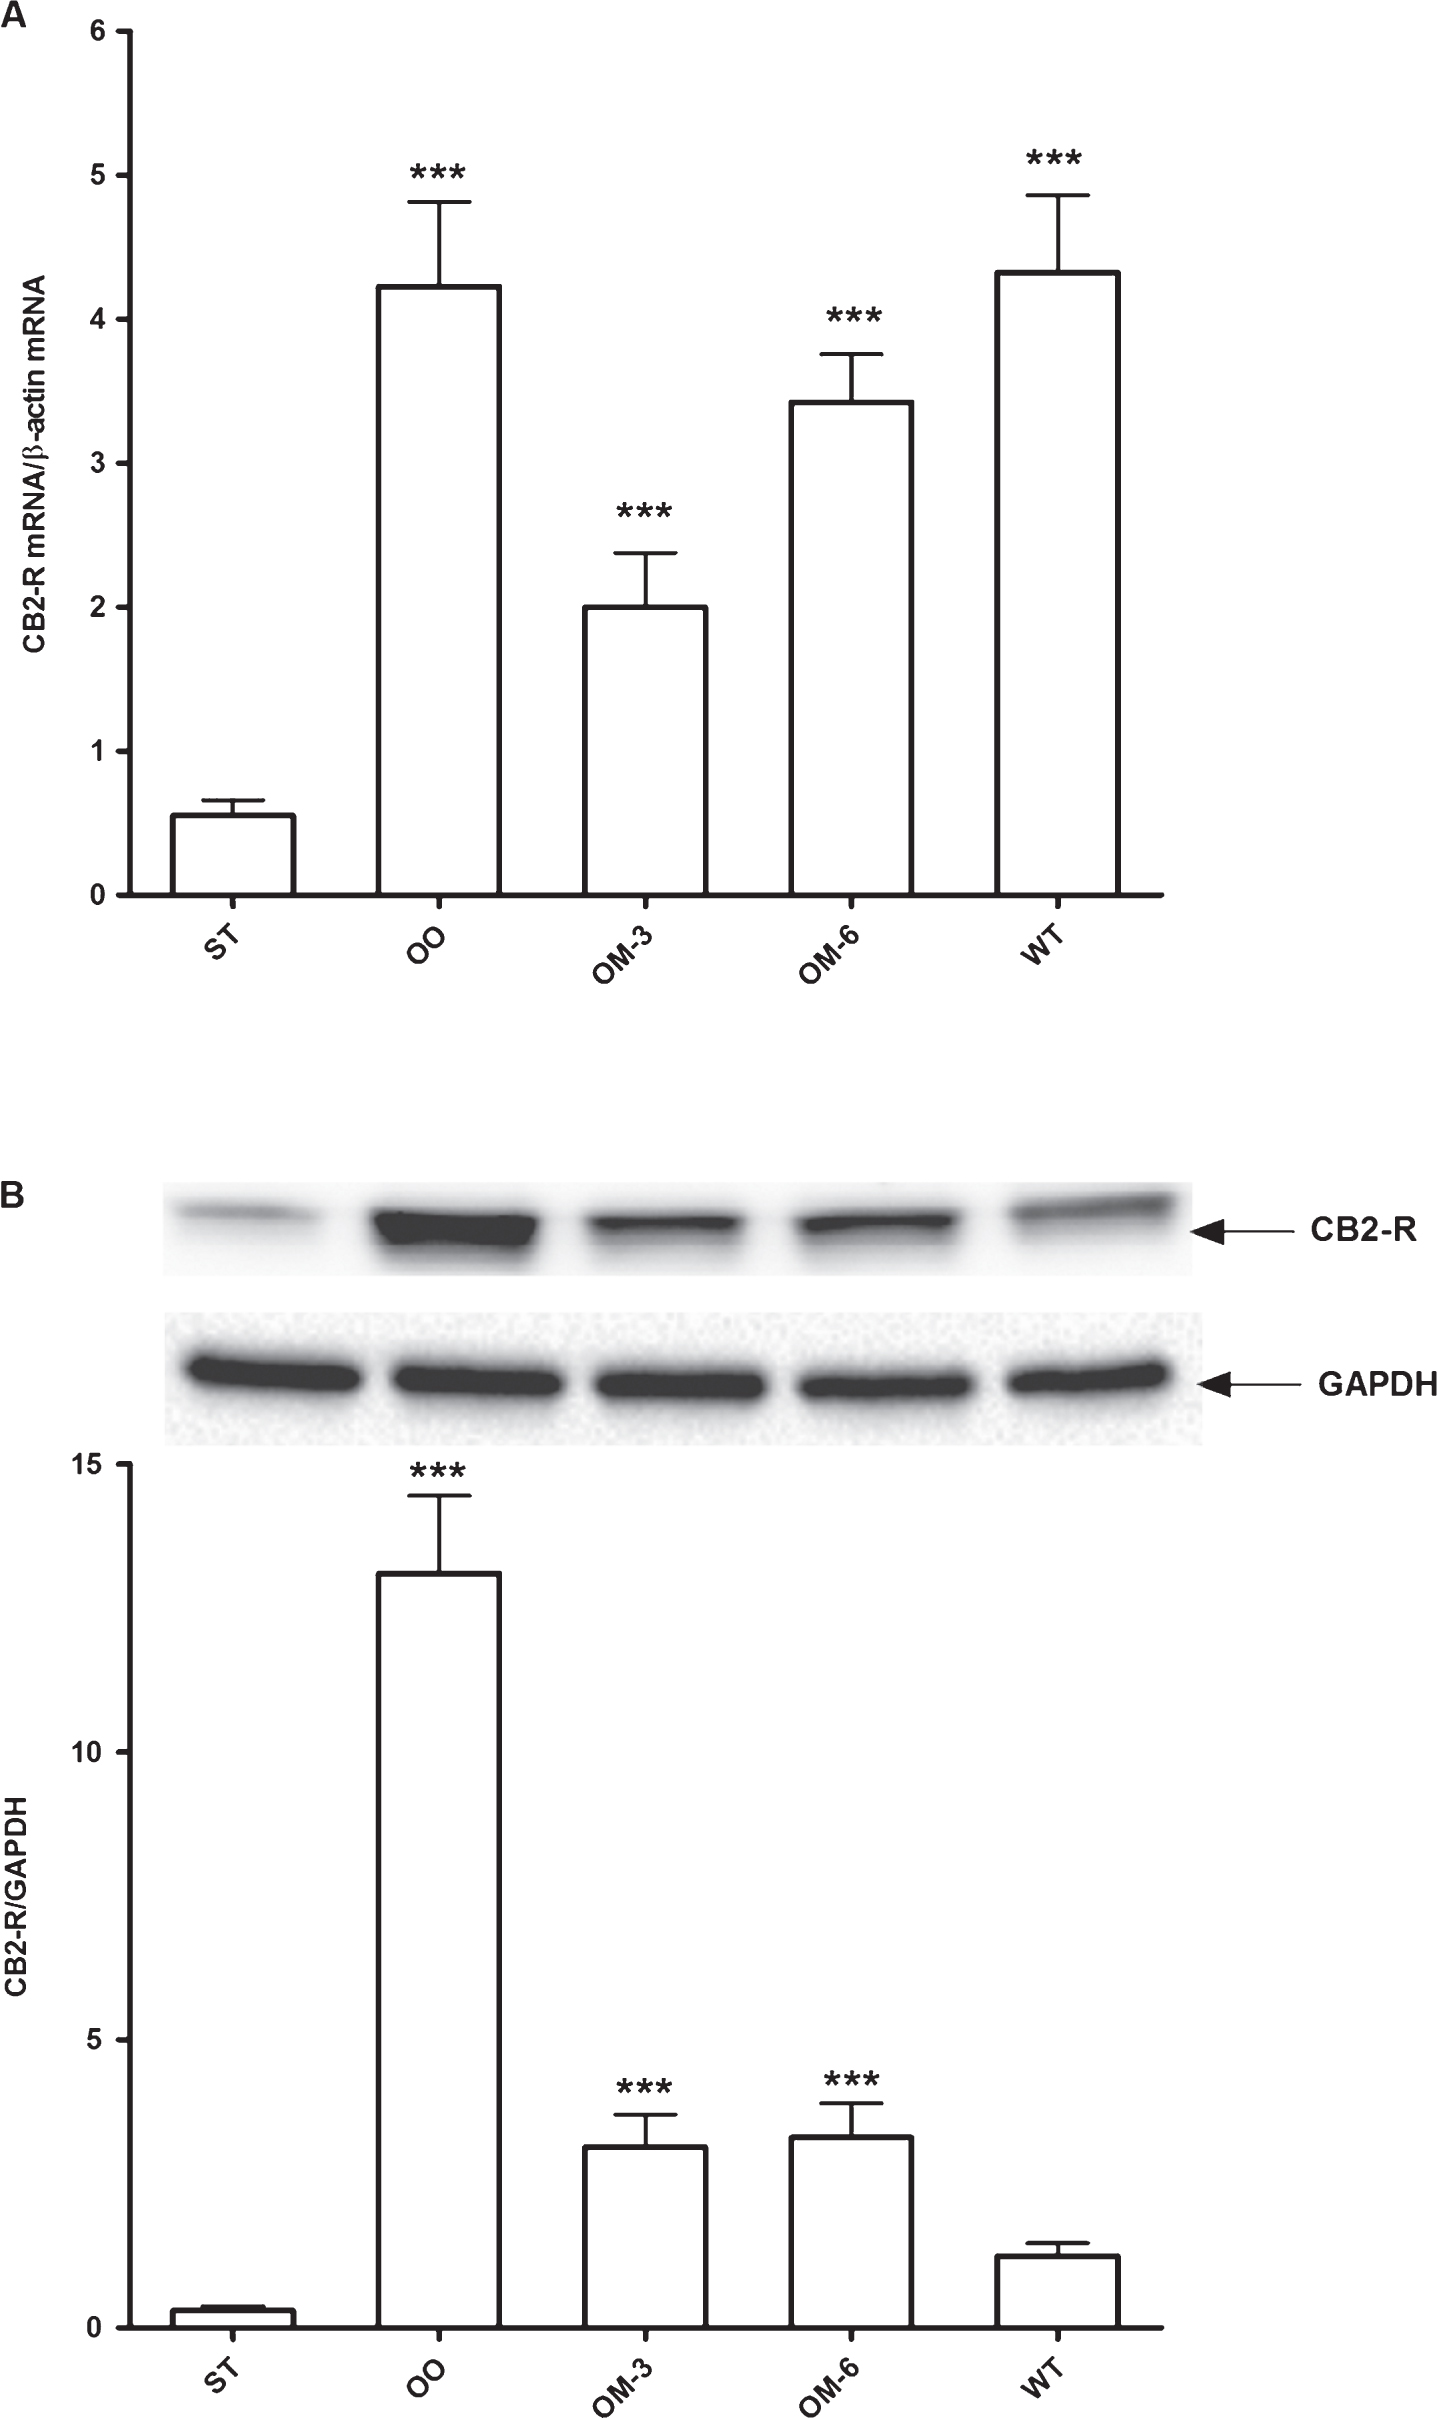 Panel A: CB2 receptor mRNA levels in adipose tissue from ApcMin/+ mice treated groups (ST = standard diet; OO = olive oil; OM-3 = omega-3 PUFAs; OM-6 = omega-6 PUFAs supplemented diet) and in the Wilde Type (WT) mice group. Data are presented as the mean±SE of ten animals for each group and expressed as n° molecules mRNA CB2 receptor gene/n° molecules mRNA β-actin. Panel B: Western blotting analysis of CB2 receptor protein in the same groups of treatment. Levels of CB2 receptor protein expression were normalized with Glyceraldeide 3-phosphate dehydrogenase (GAPDH) protein expression. ***P < 0.005 (one-way analysis of variance and Dunnett Post Test).